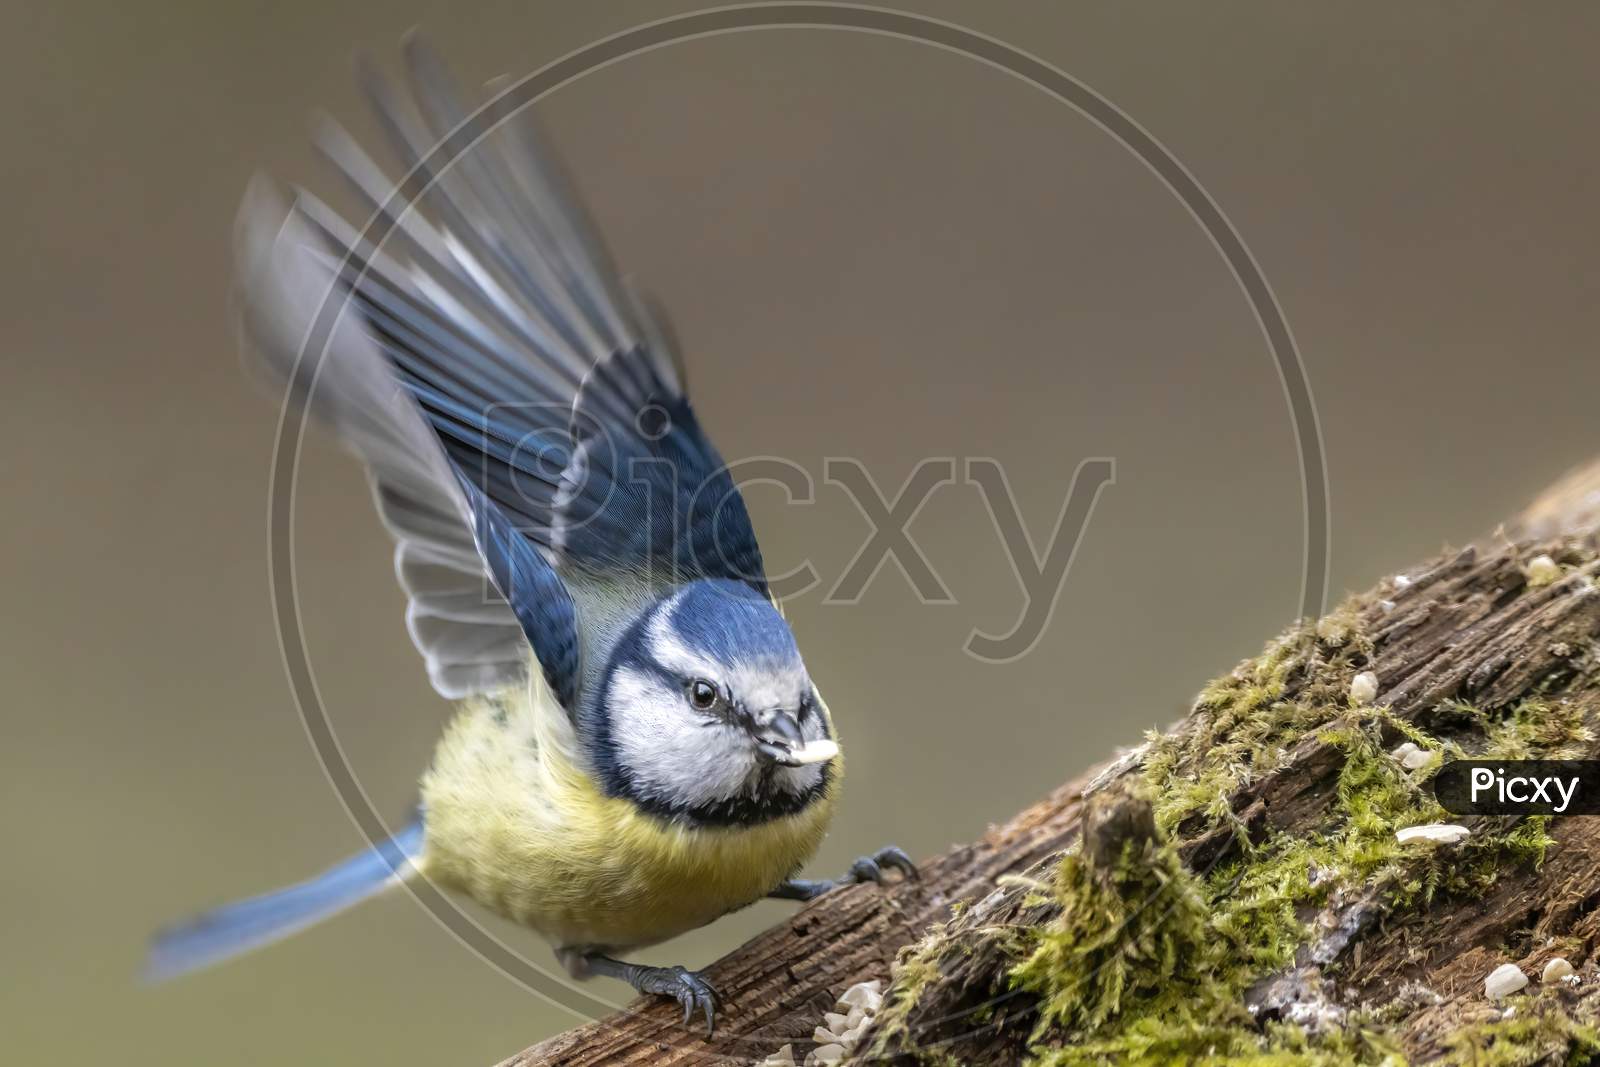 Blue tit at a feeding place at the Mönchbruch pond in a natural reserve in Hesse Germany. Looking for food in winter time.